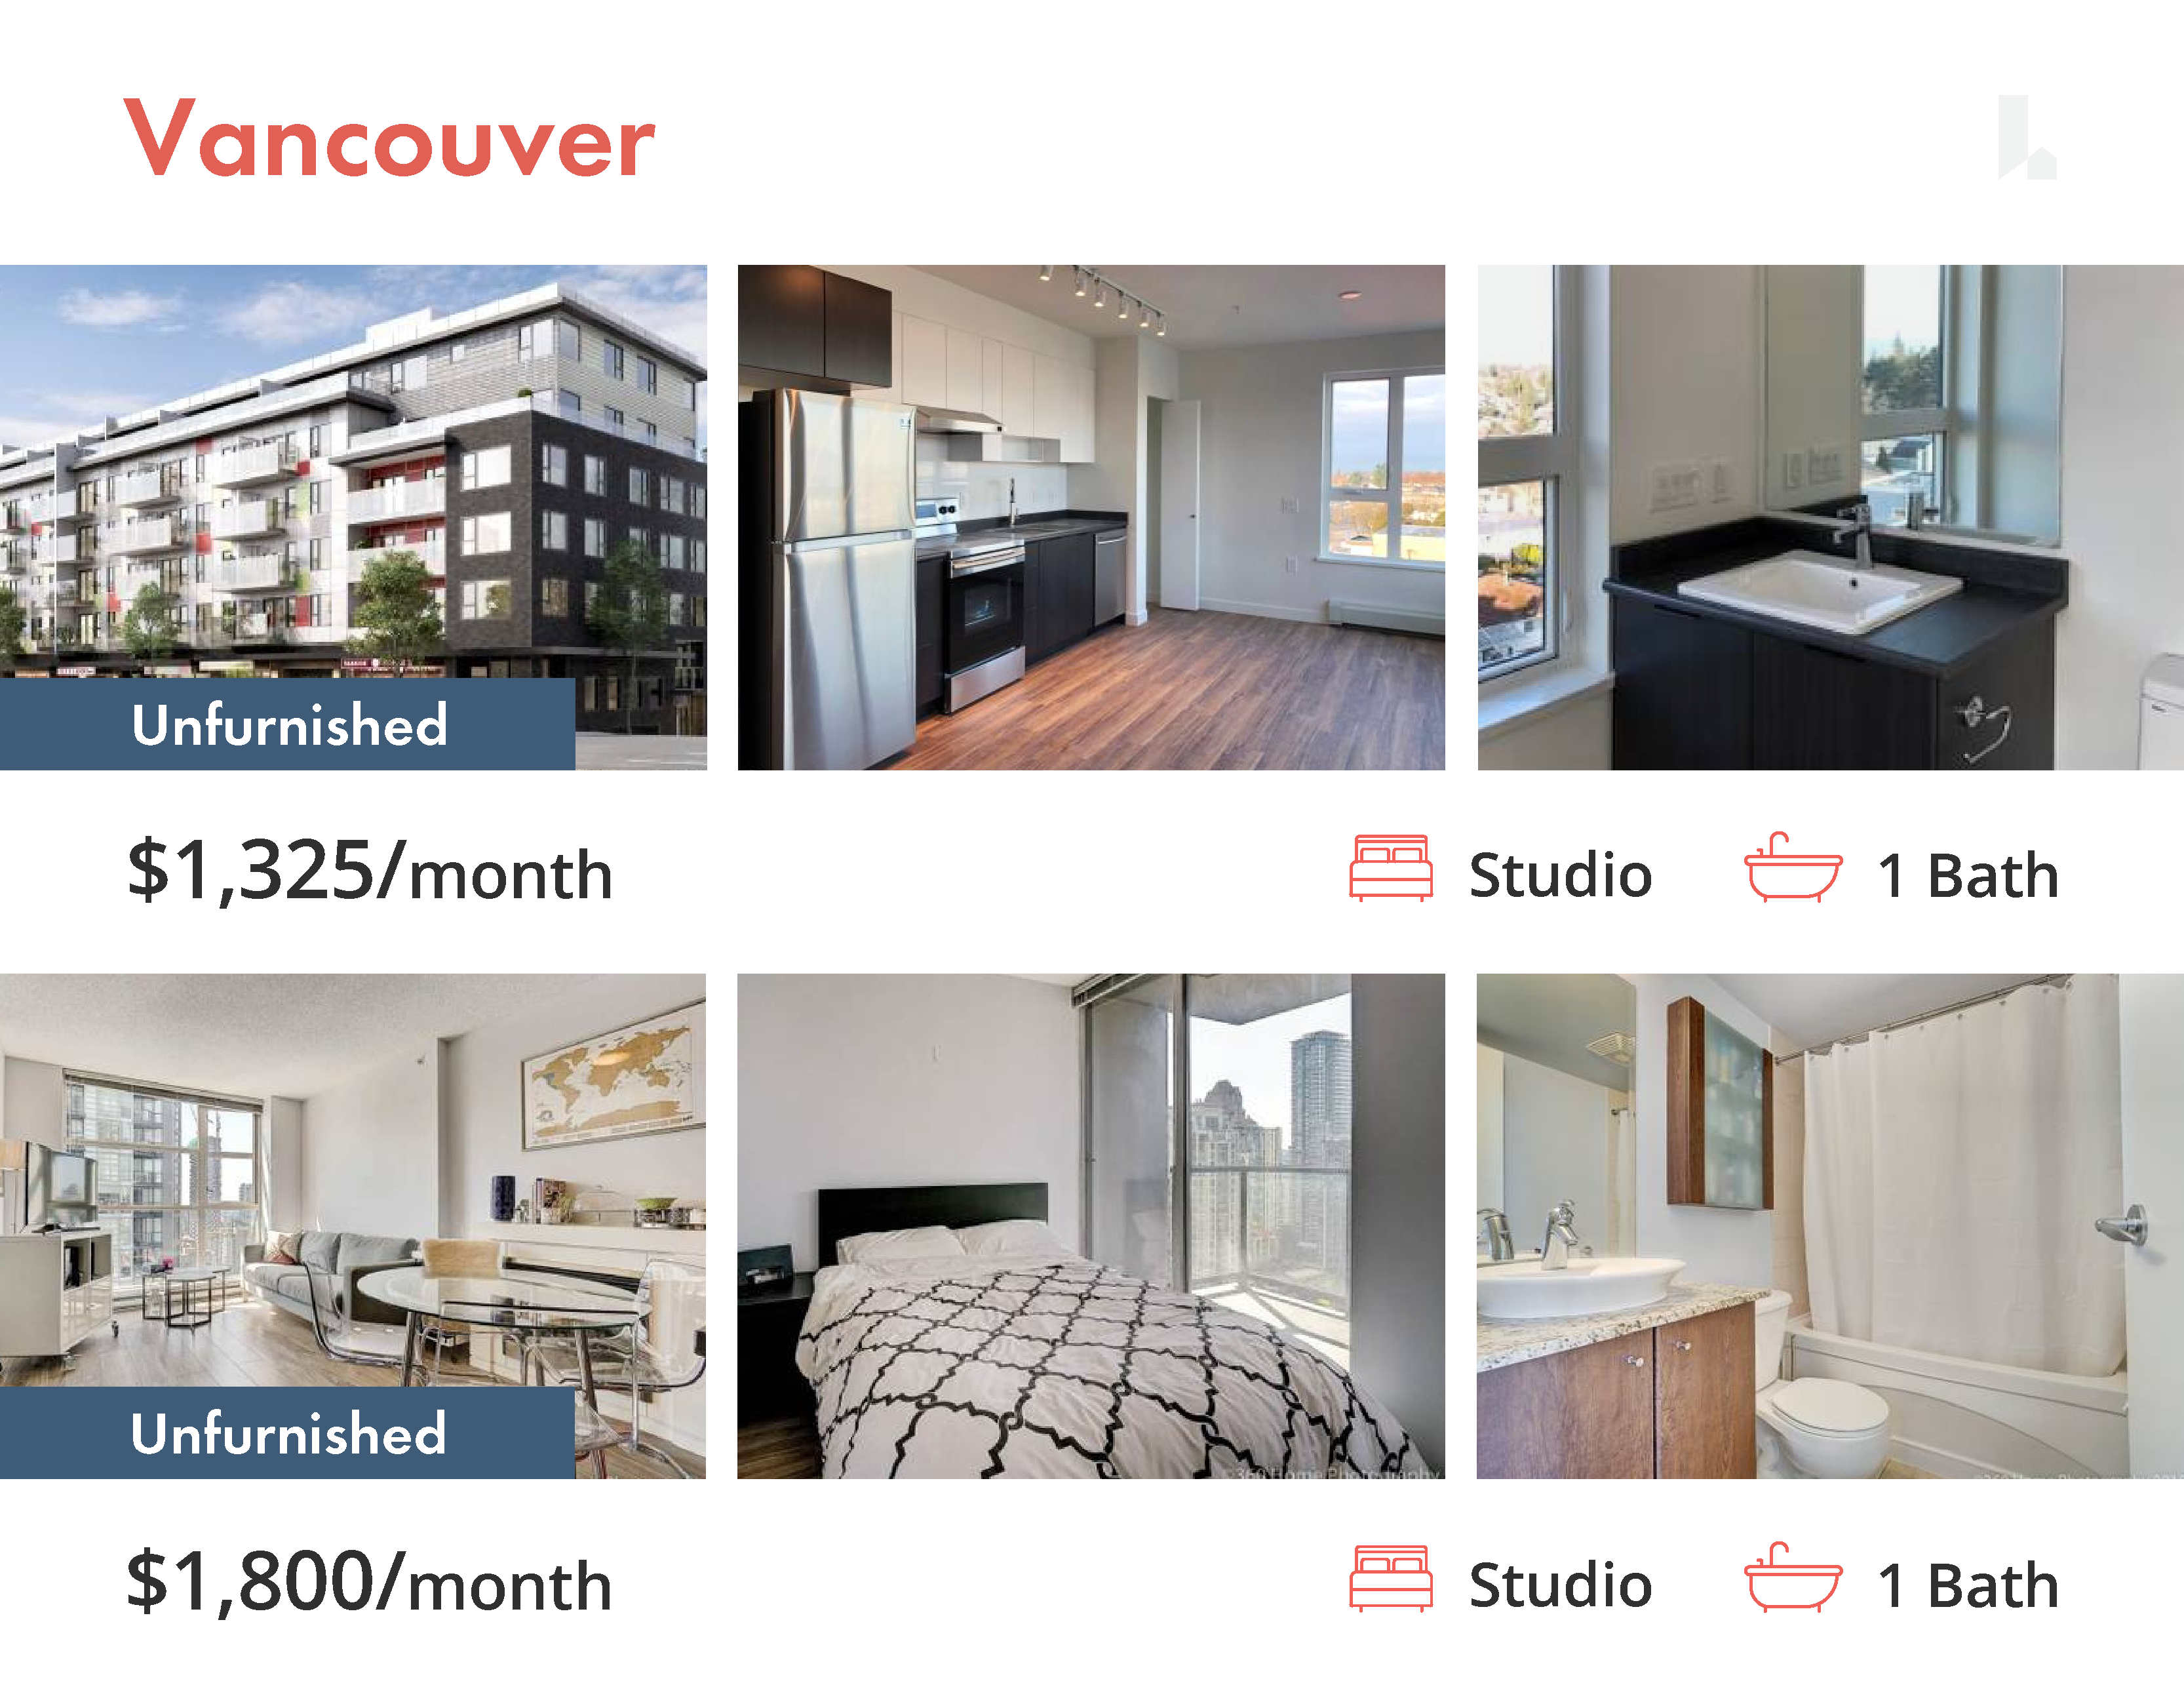 Vancouver Apartment Rentals For $1800 Or Less